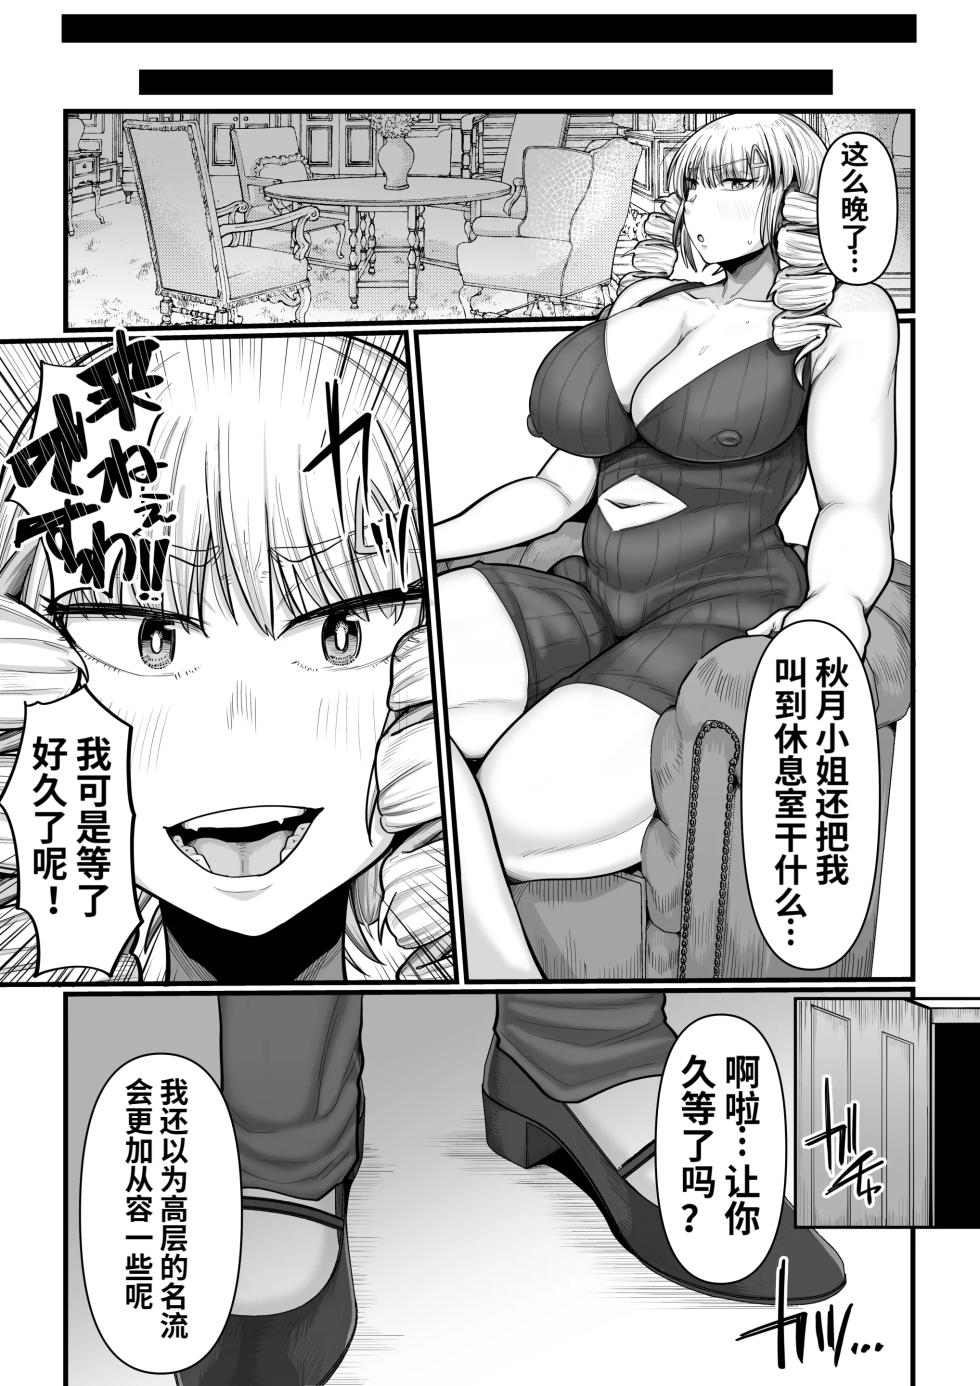 [Ebi no Implant (Shrimp Cake)](New Futanari Ojou-sama Tenant Just Moved In) Suburban Mansion Looking For Tenants [Fully Equipped With Futanari Meat Toilet] - Page 10